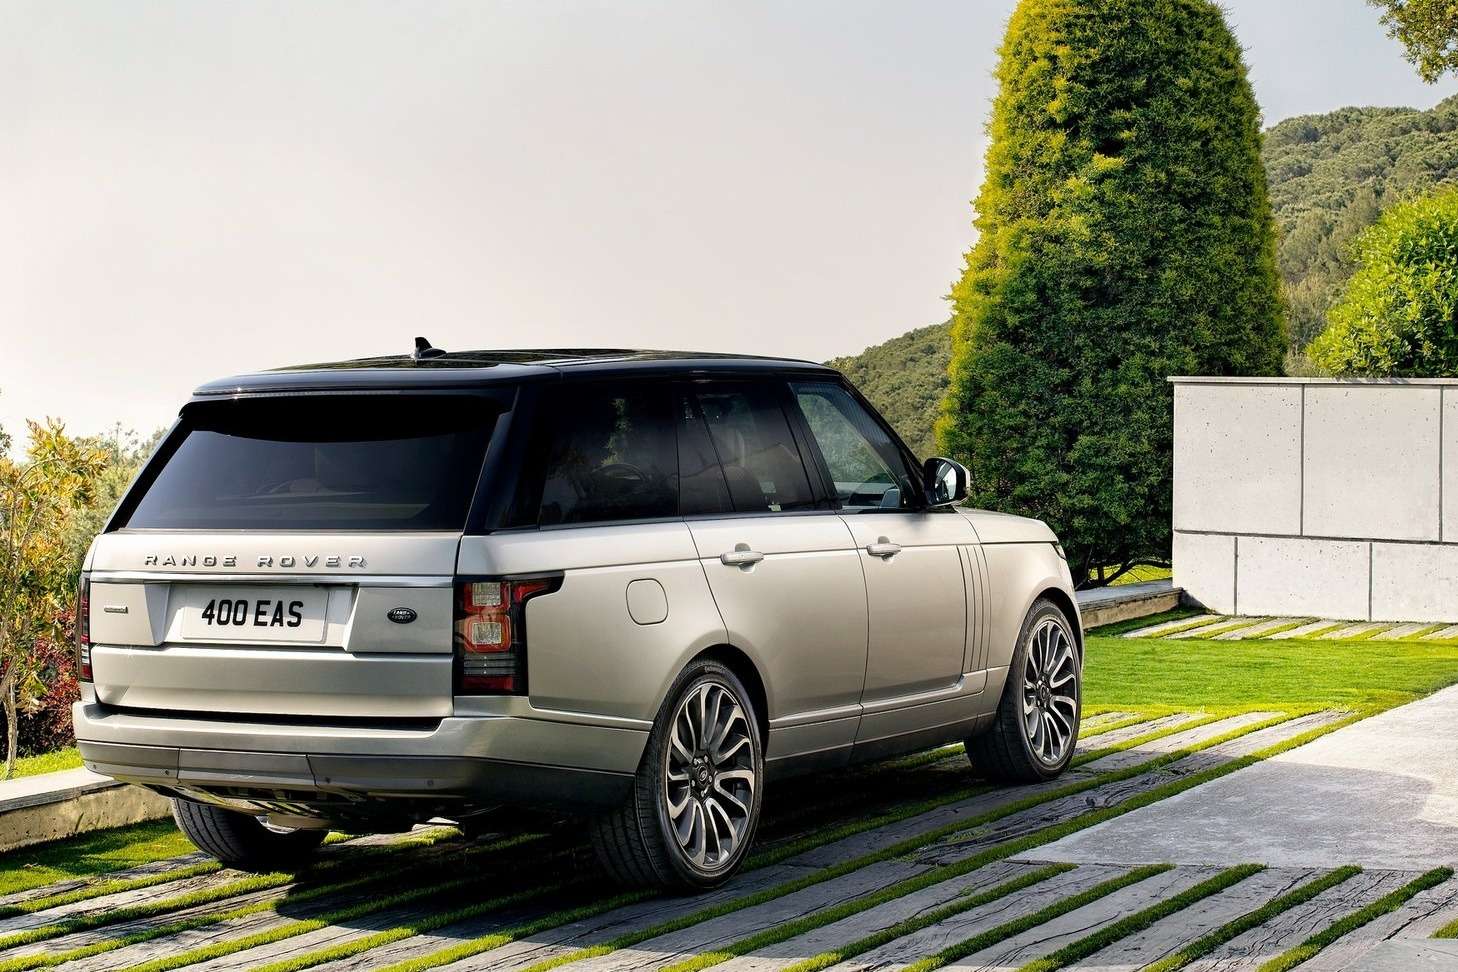 New Land Rover Range Rover side-rear view 2_no_copyright